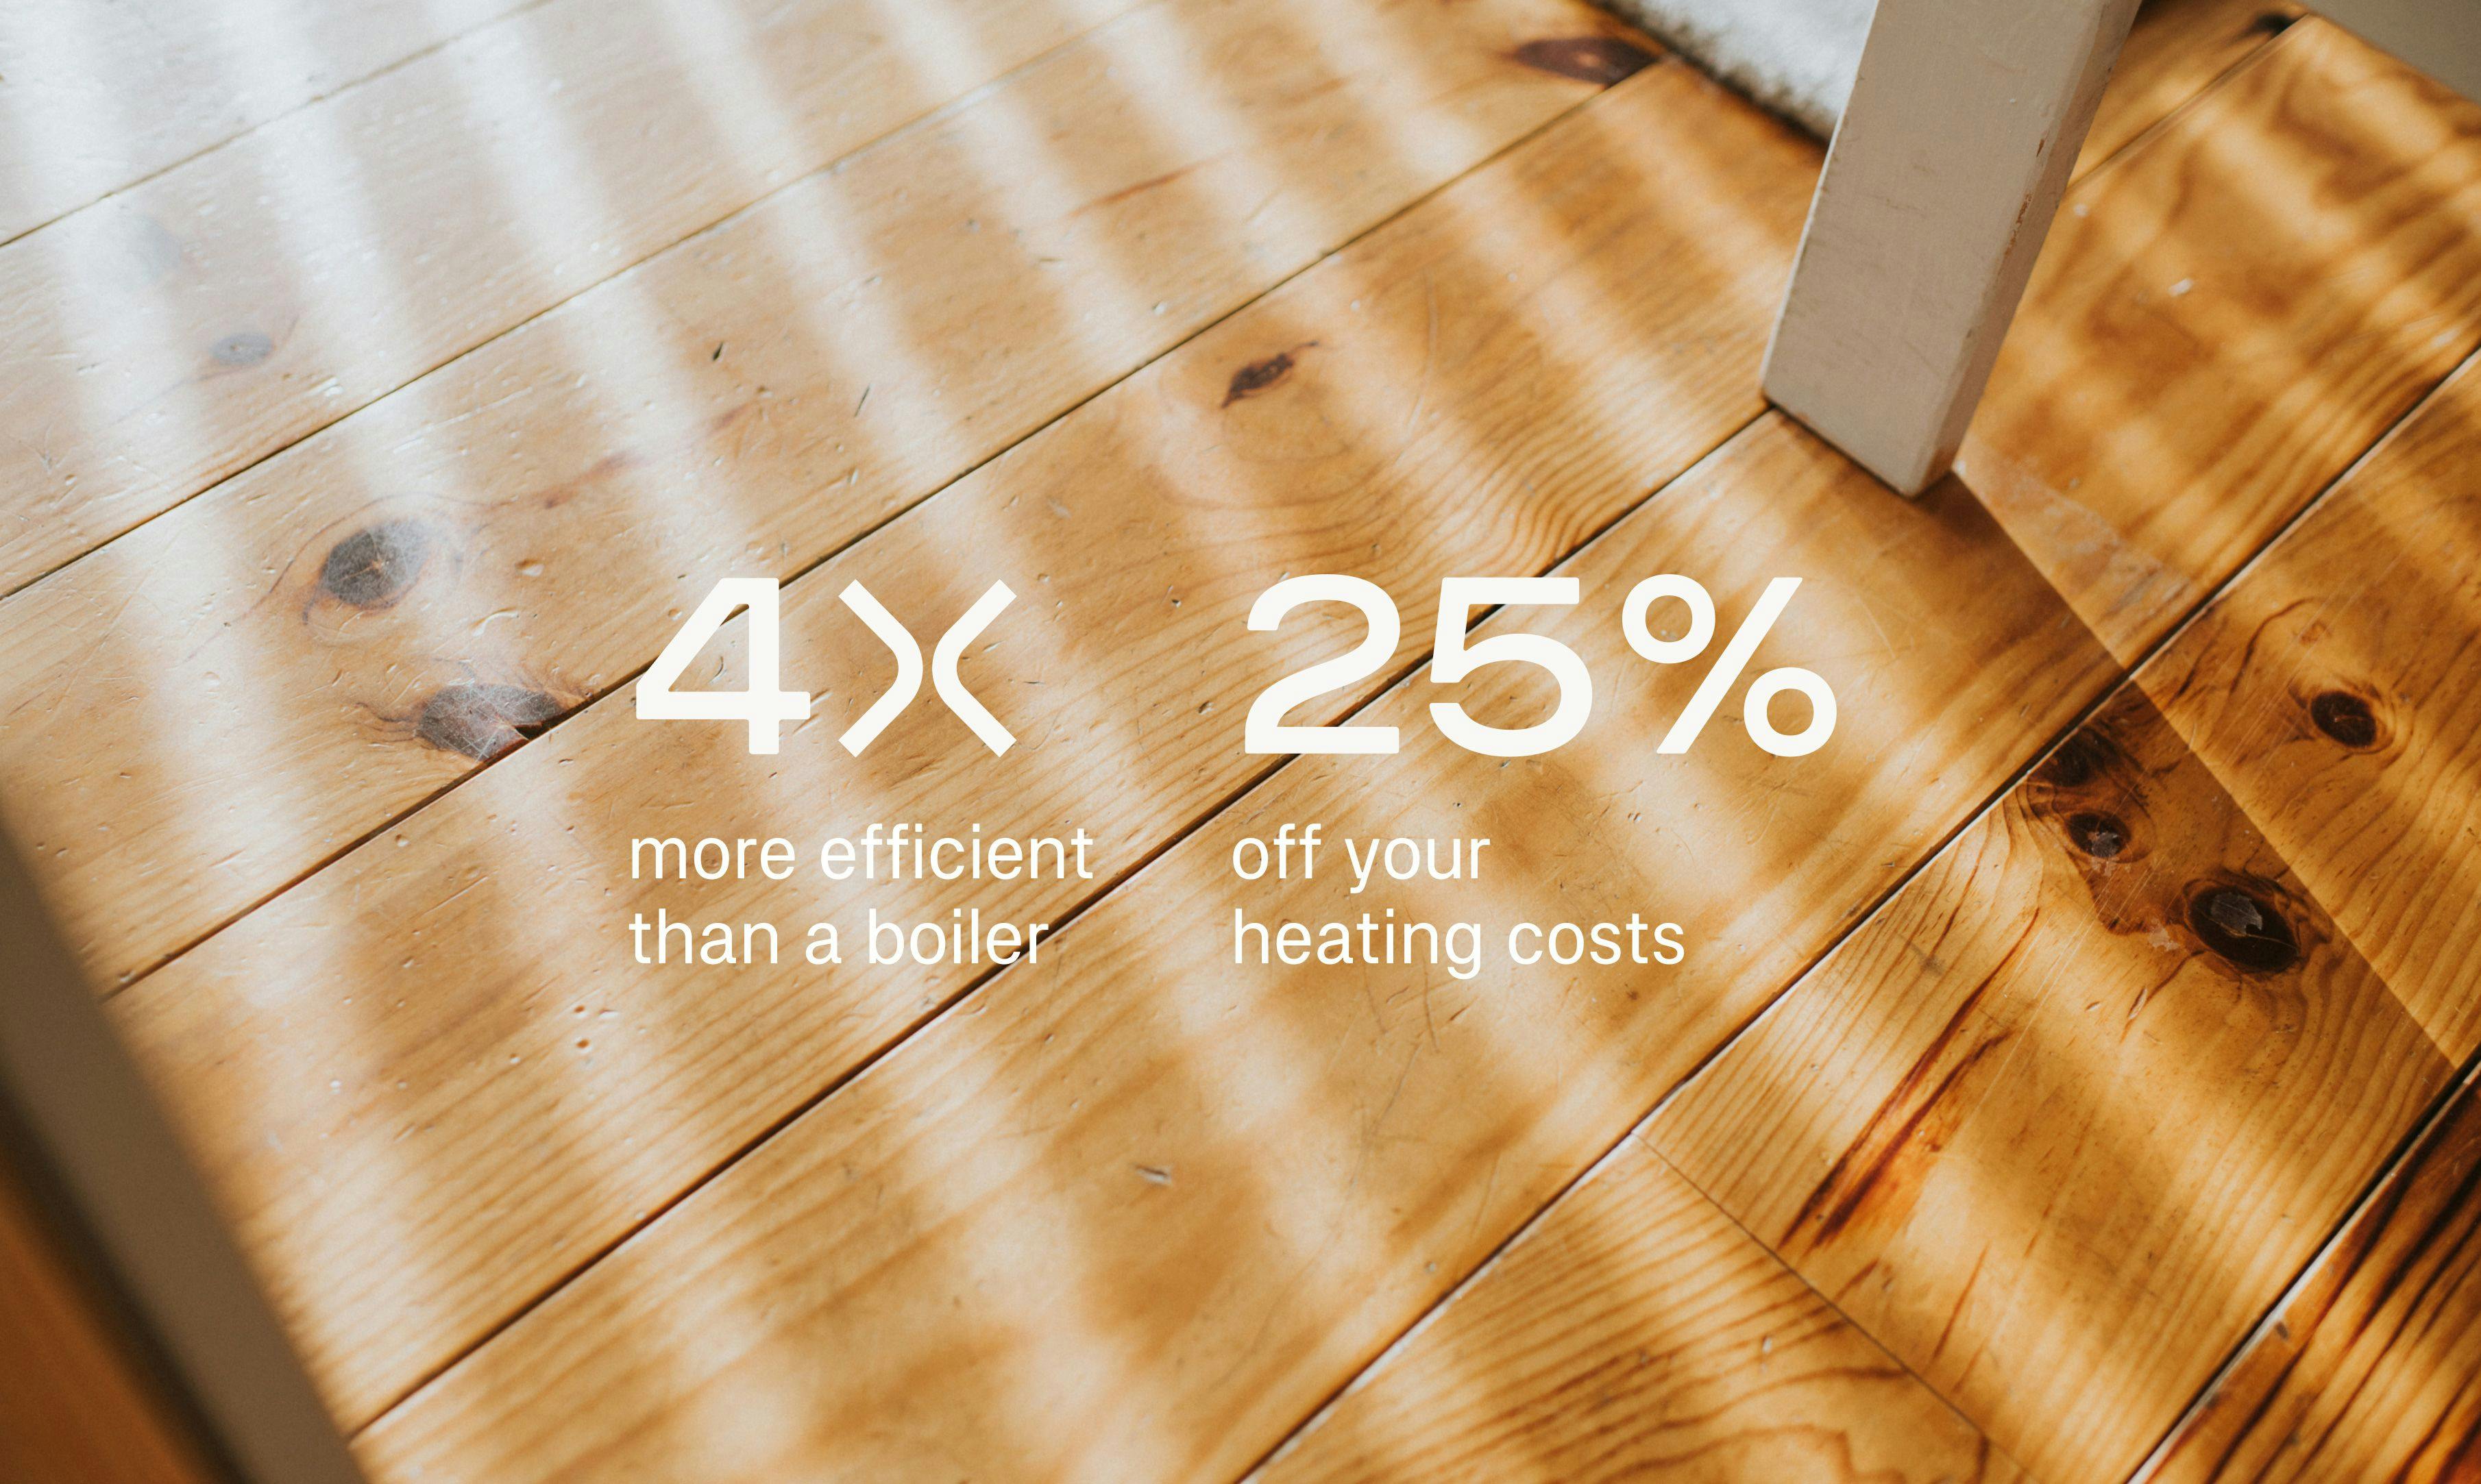 Wooden flooring with beams of light and two statistics highlighting air source heat pumps are 4 times more efficient than boilers and reduce heating costs by 25%